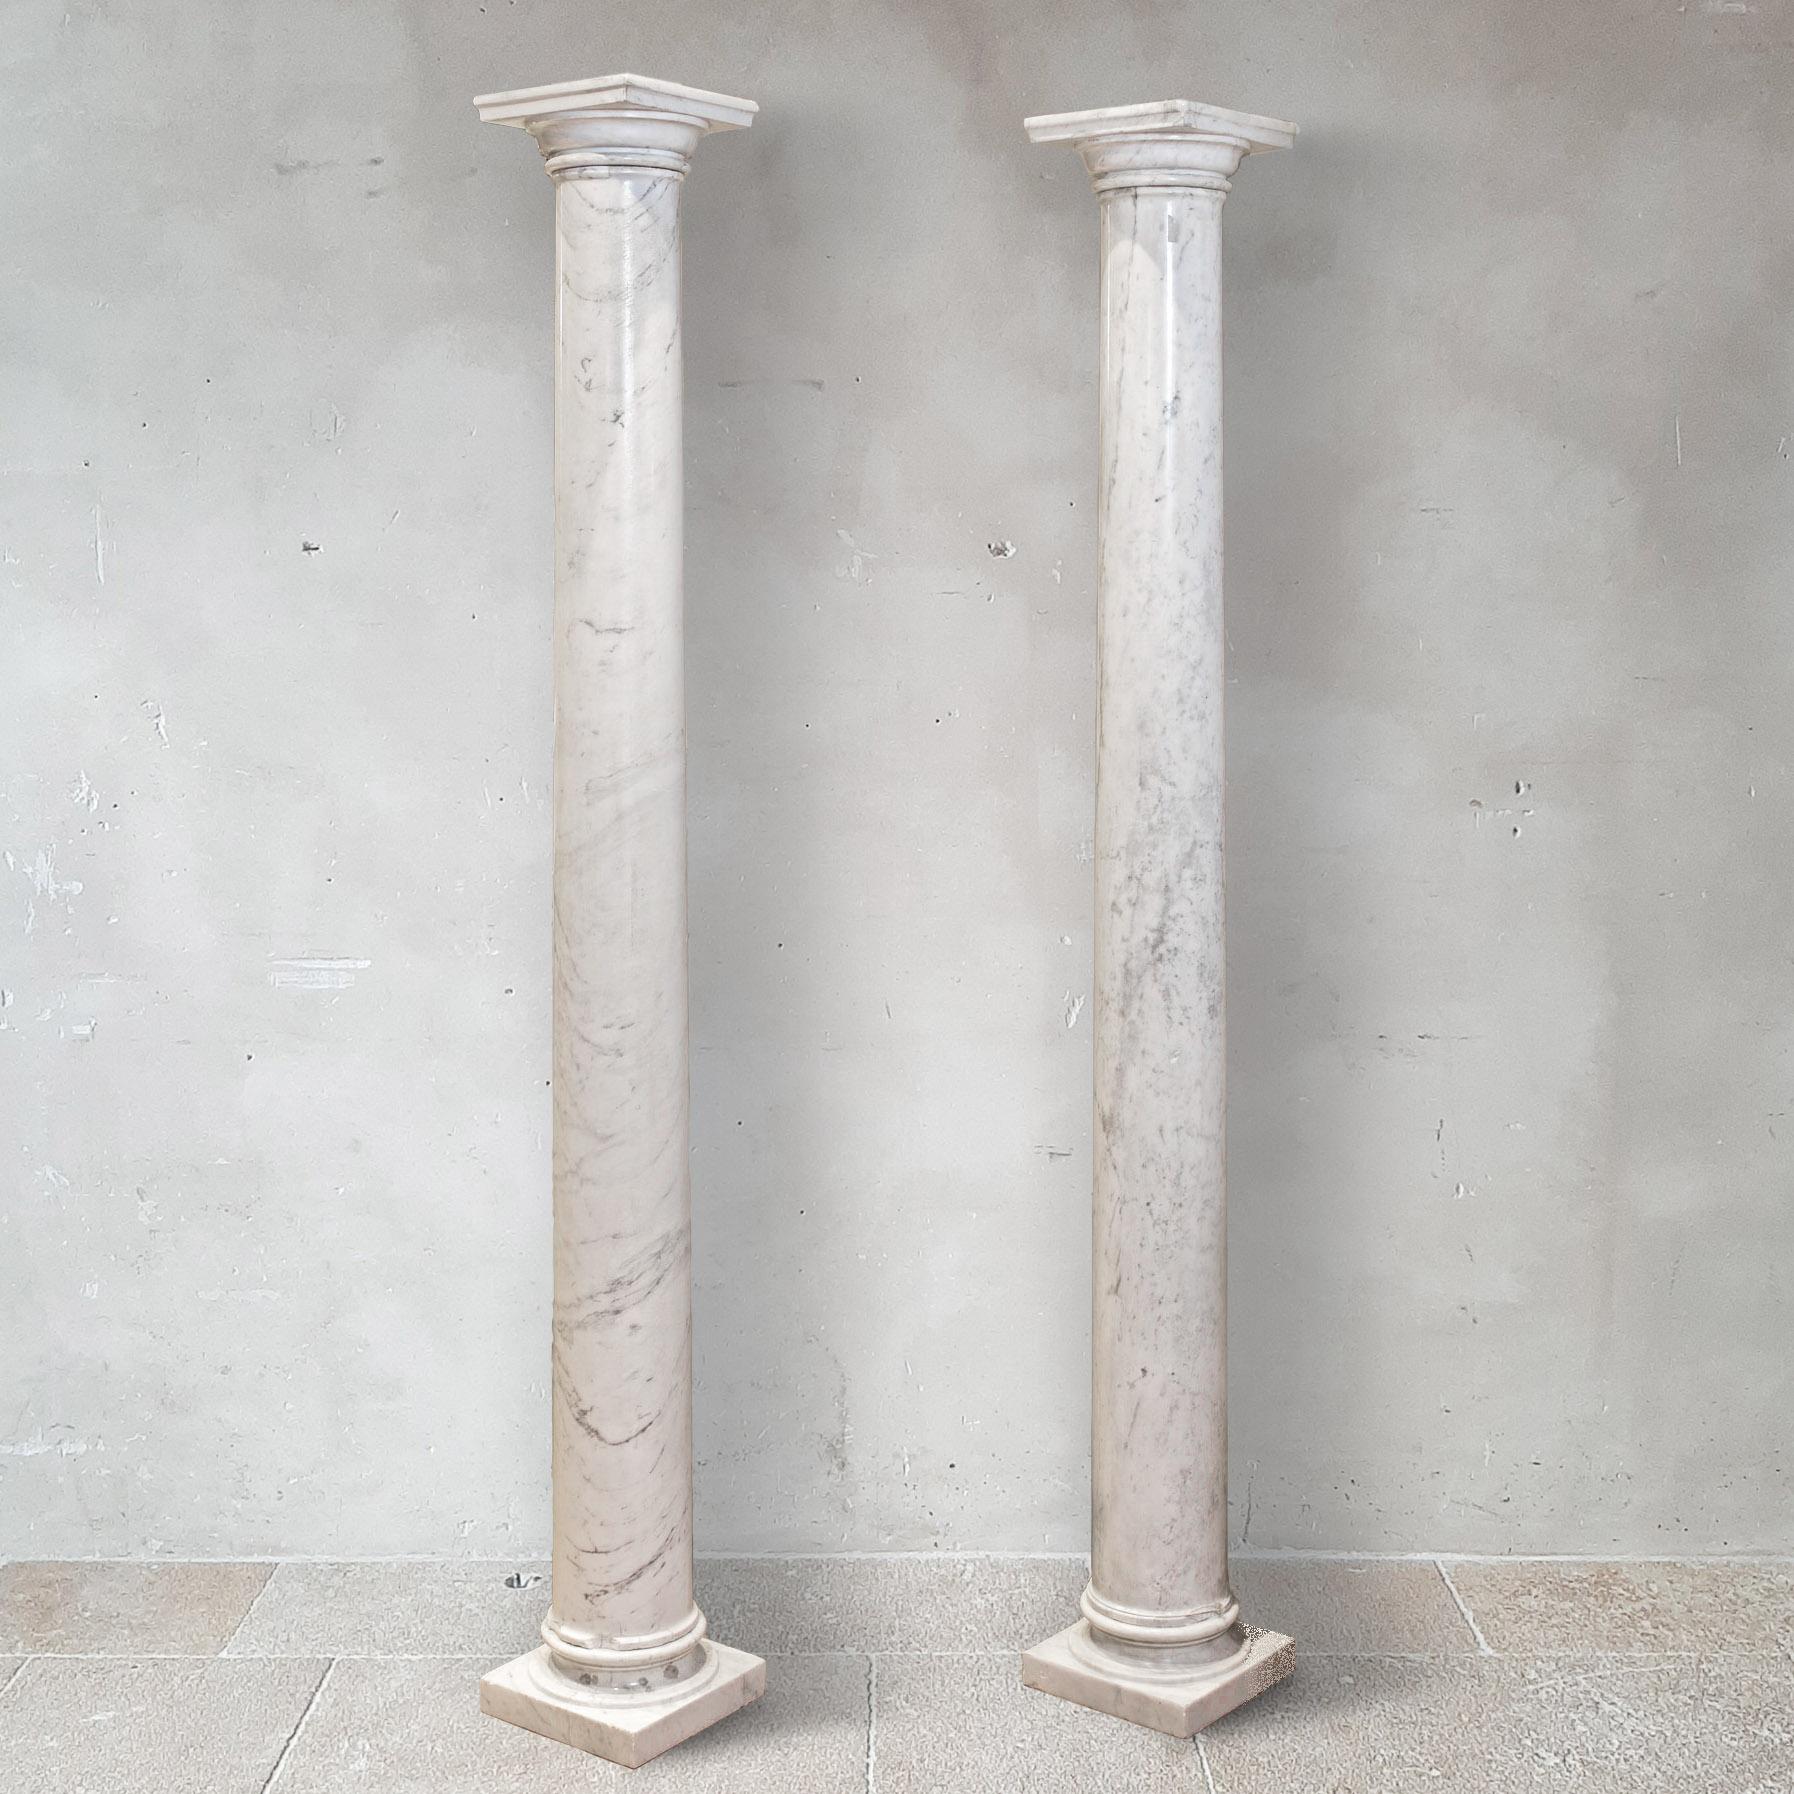 Price for the pair!
A pair of white marble columns with light gray veining, early 20th century. Tuscan square capitals on tapered cylindrical pillars.

± h 193 × w 24.5 x d 24.5 cm

Please note: Does not include the pair of 19th century French